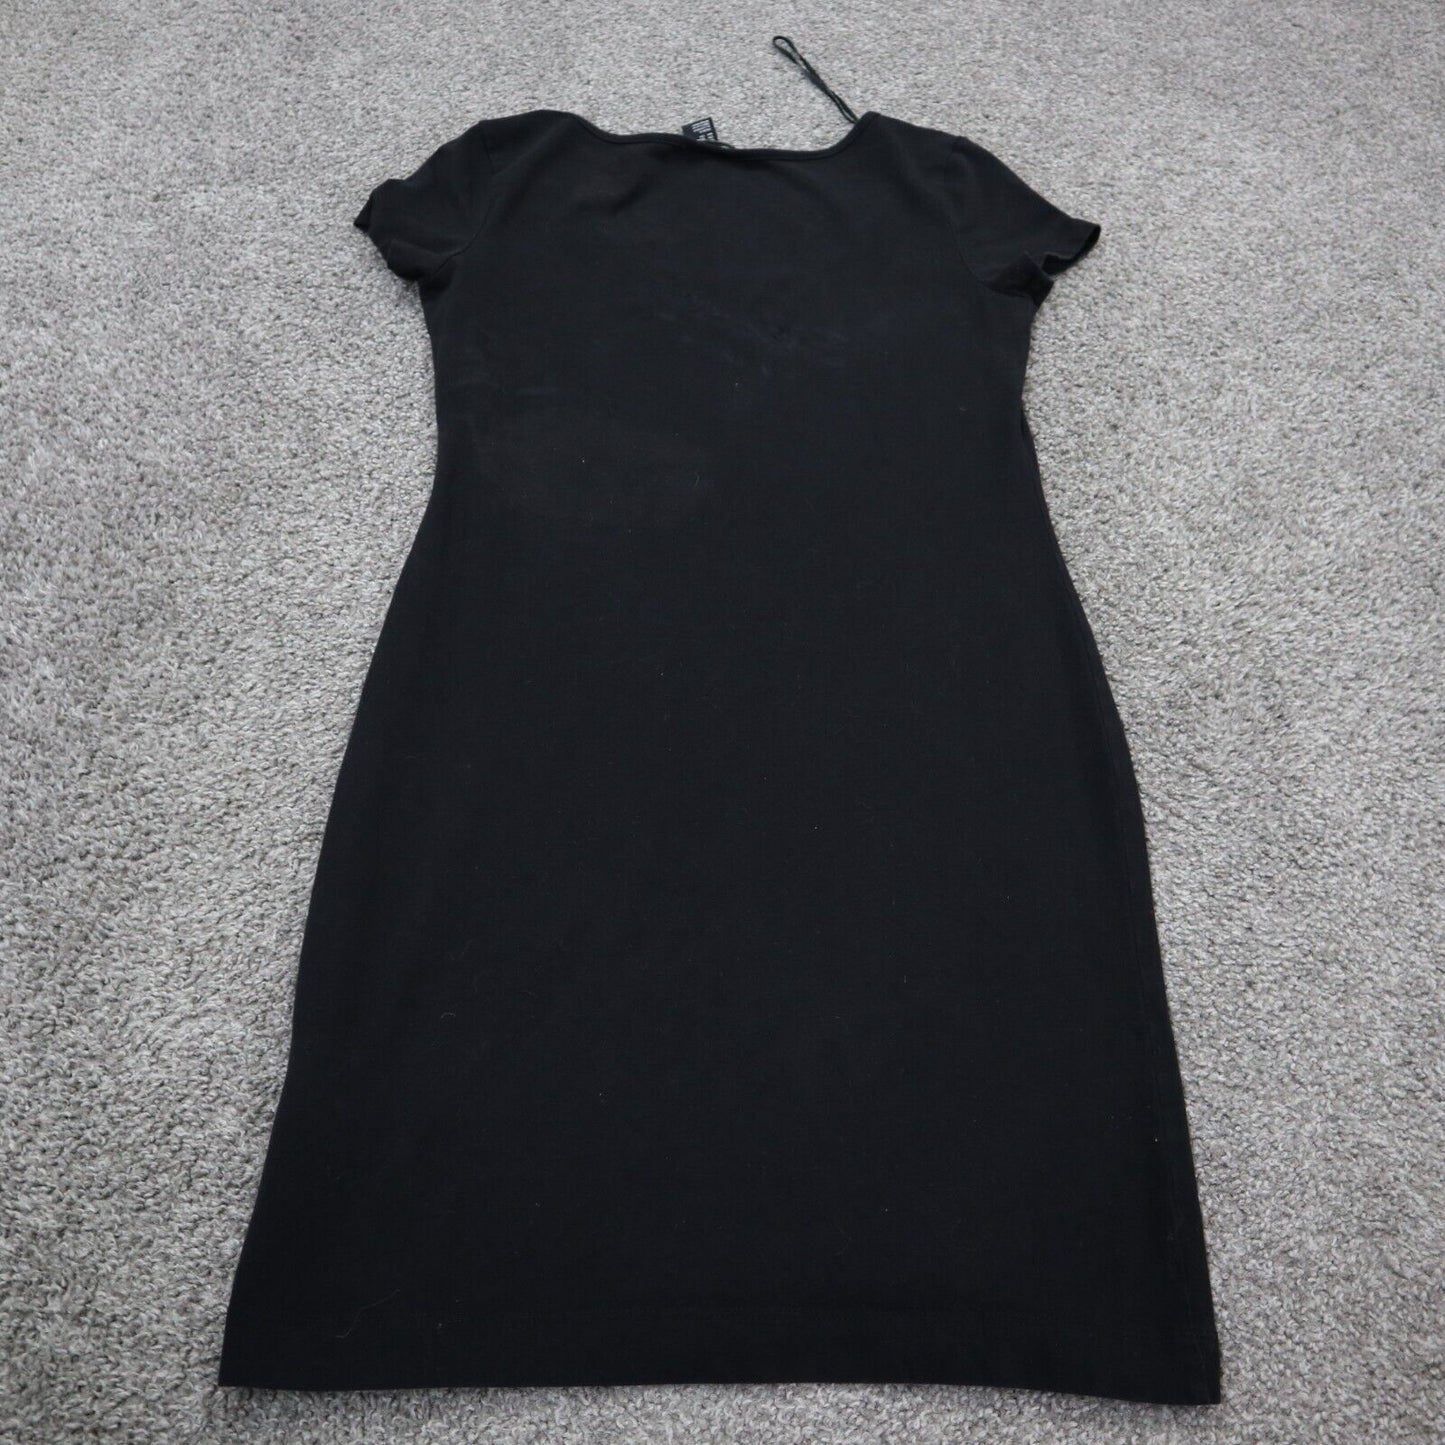 H&M Womens Casual Mini Shift Dress Short Sleeves Round Neck Black Size Small